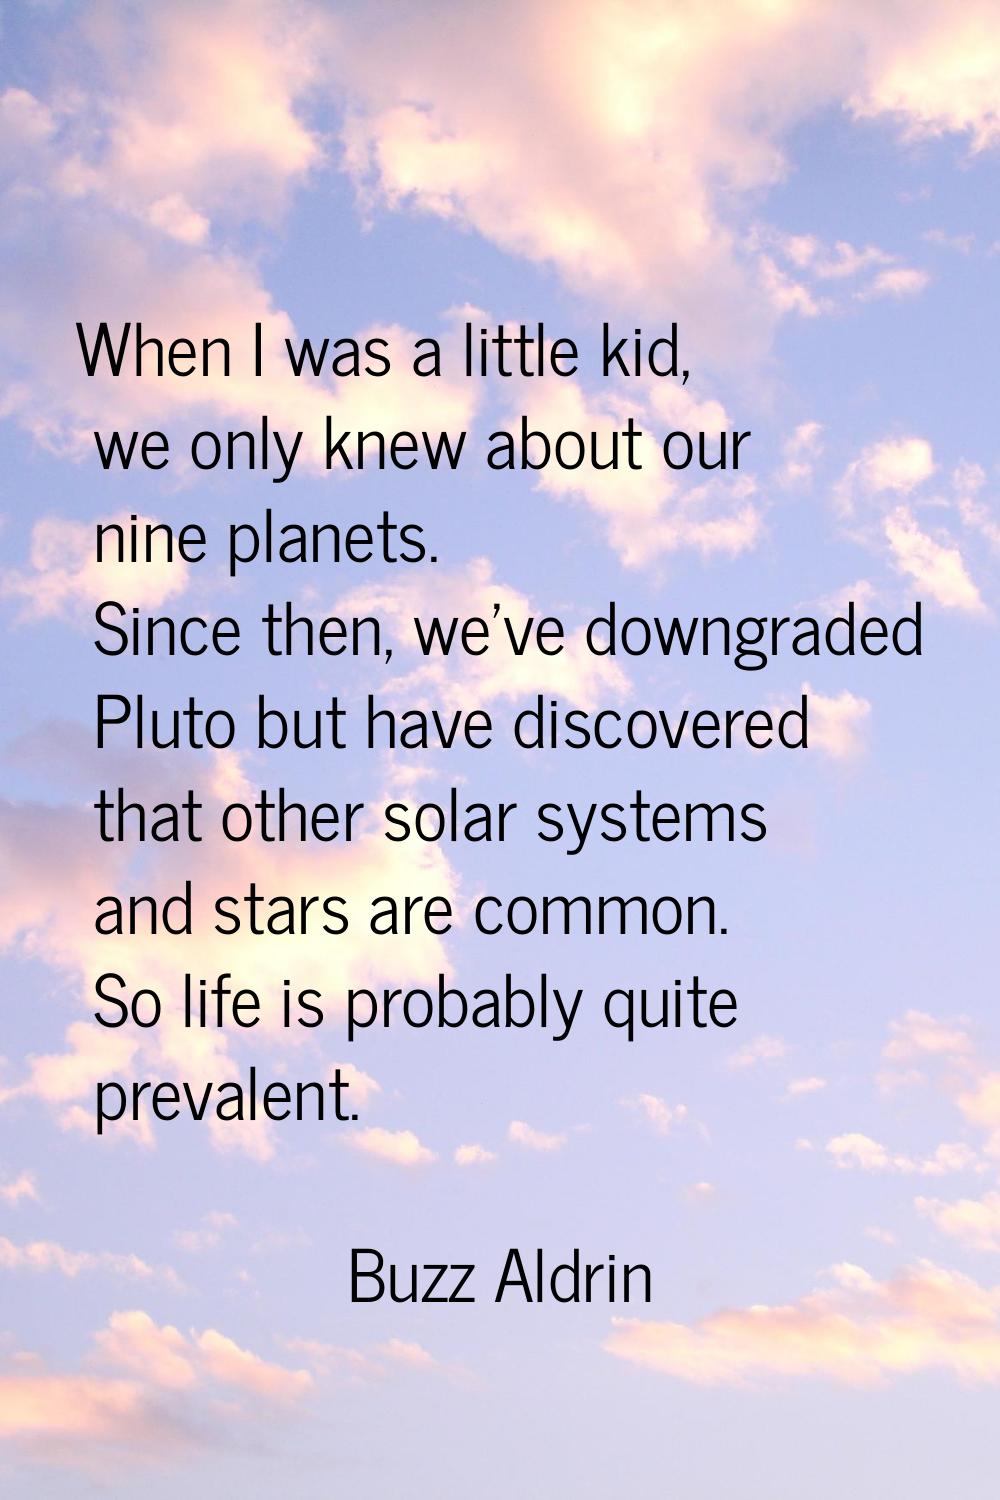 When I was a little kid, we only knew about our nine planets. Since then, we've downgraded Pluto bu